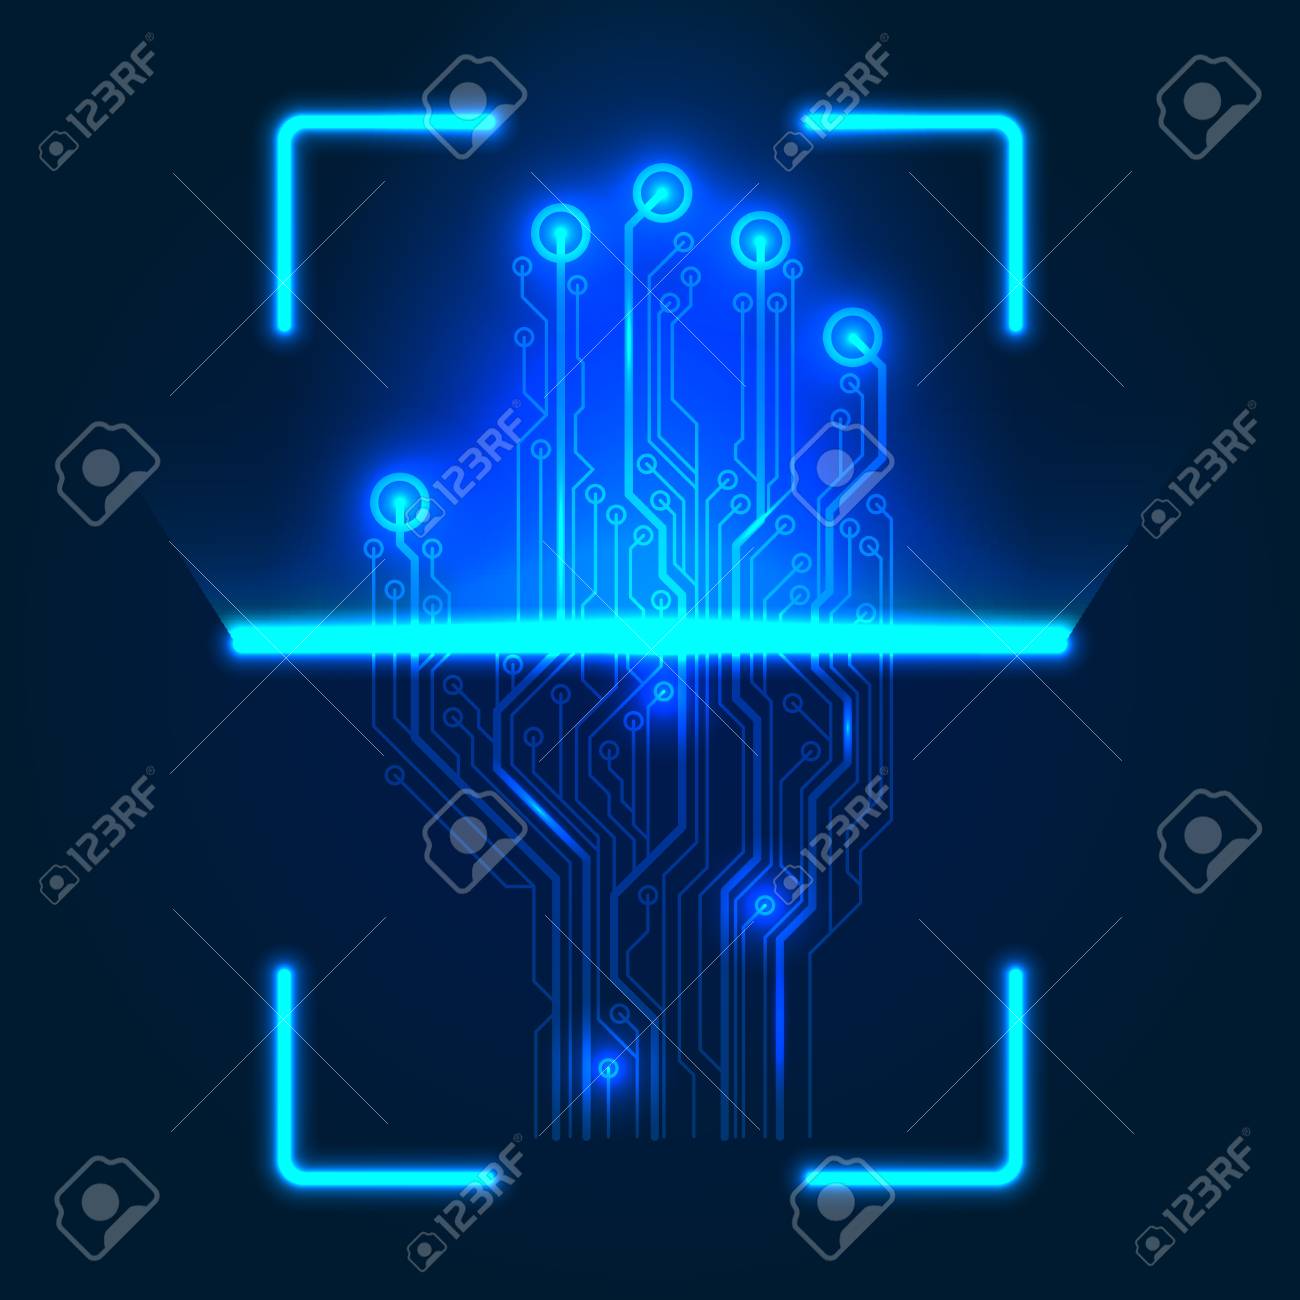 Hand Circuit Board Scanner Vector Illustration On A Blue